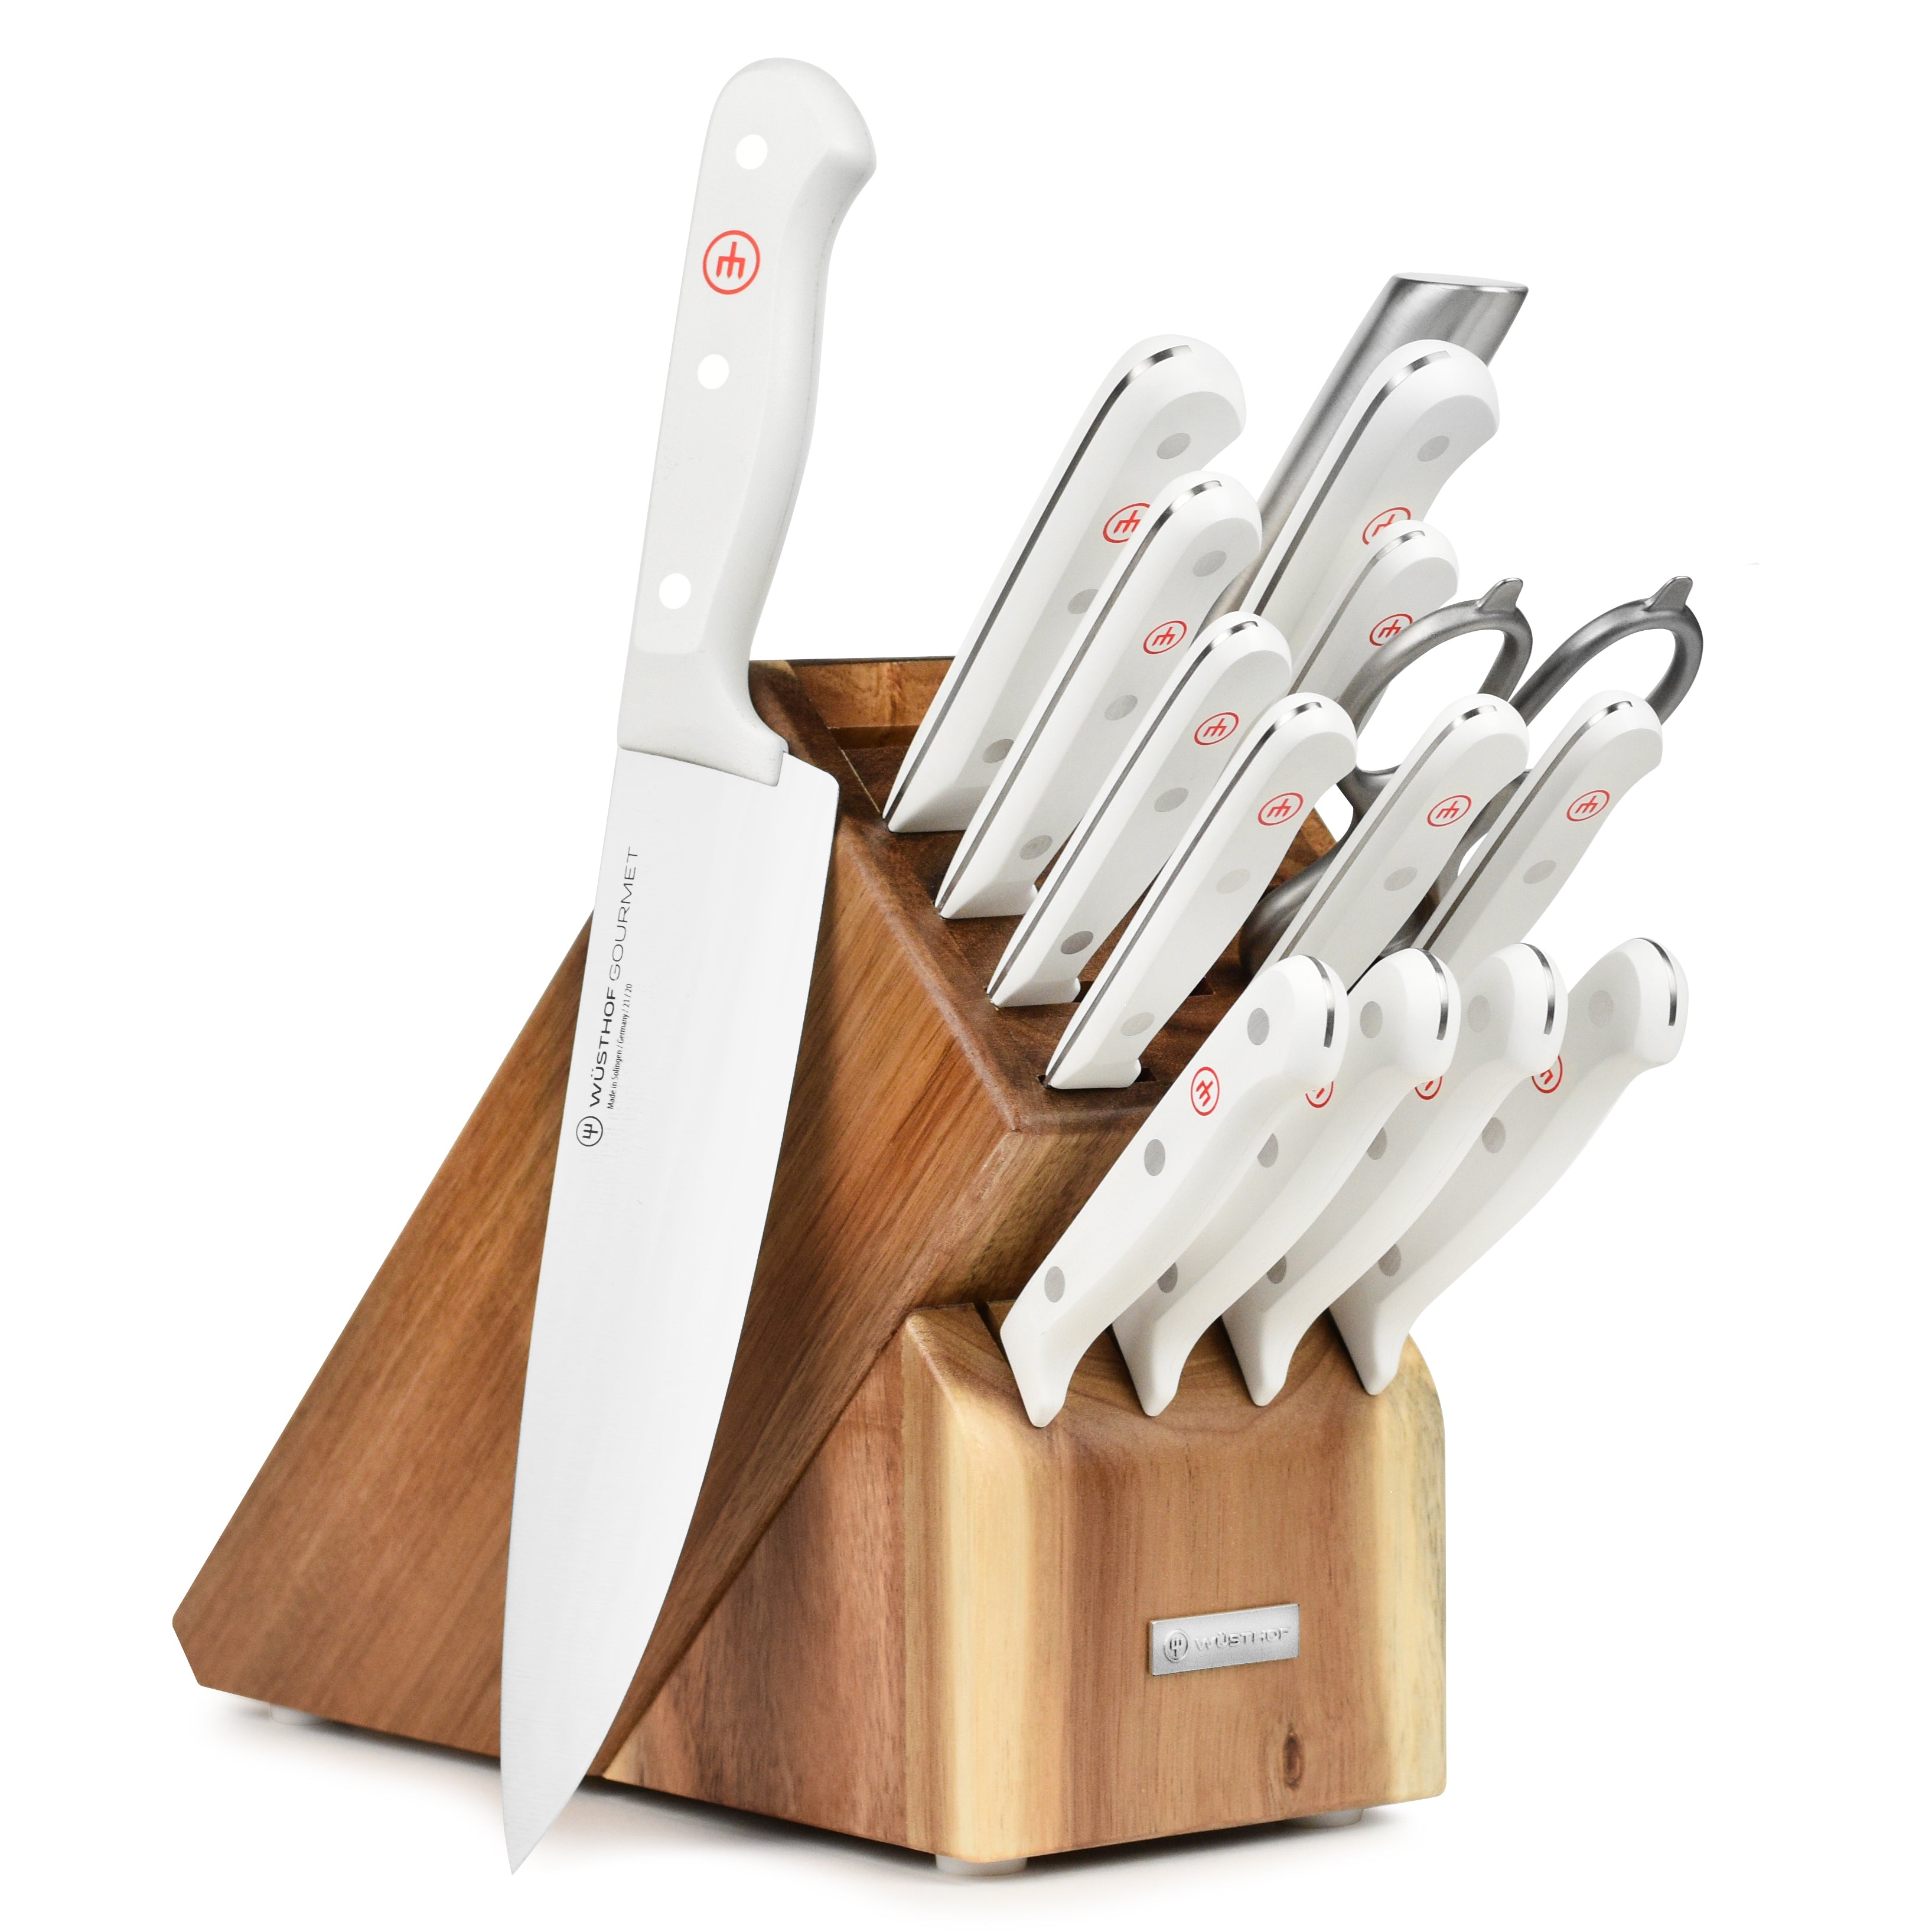  Knife Set, 21 Pieces Kitchen Knife Set with Built in